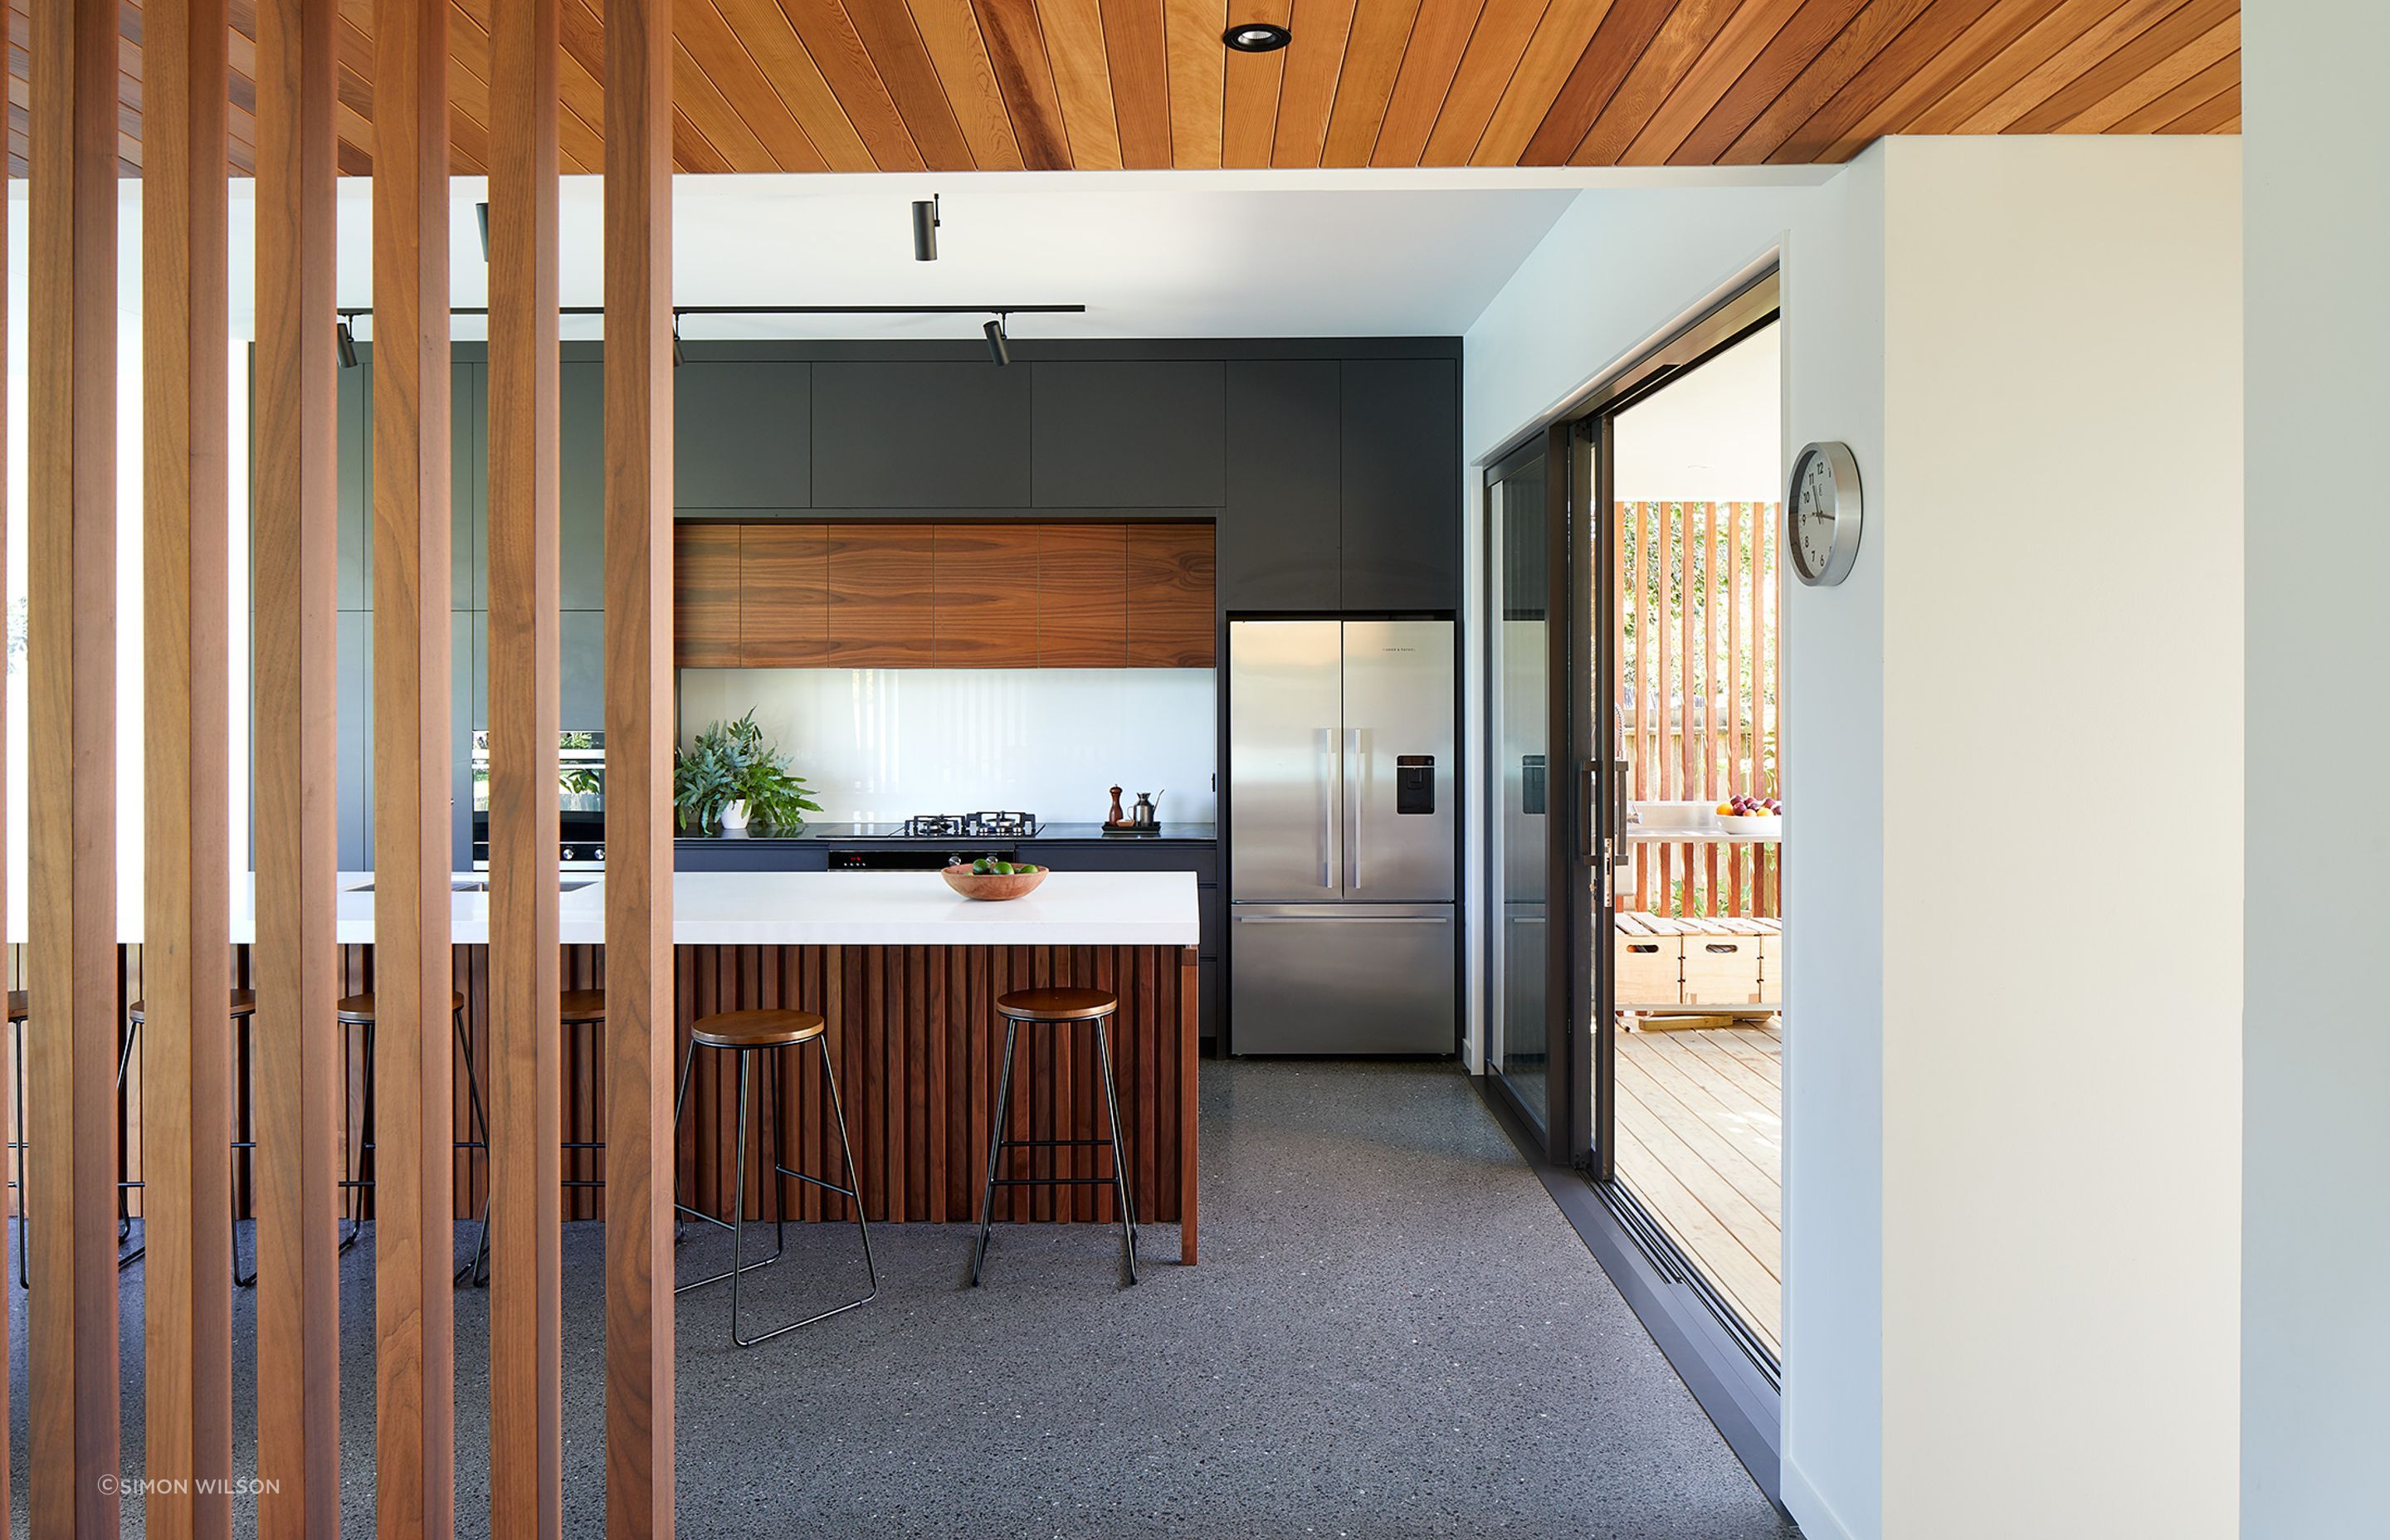 The Mod and the Rocker, St Heliers House Architecture / Rogan Nash Architects